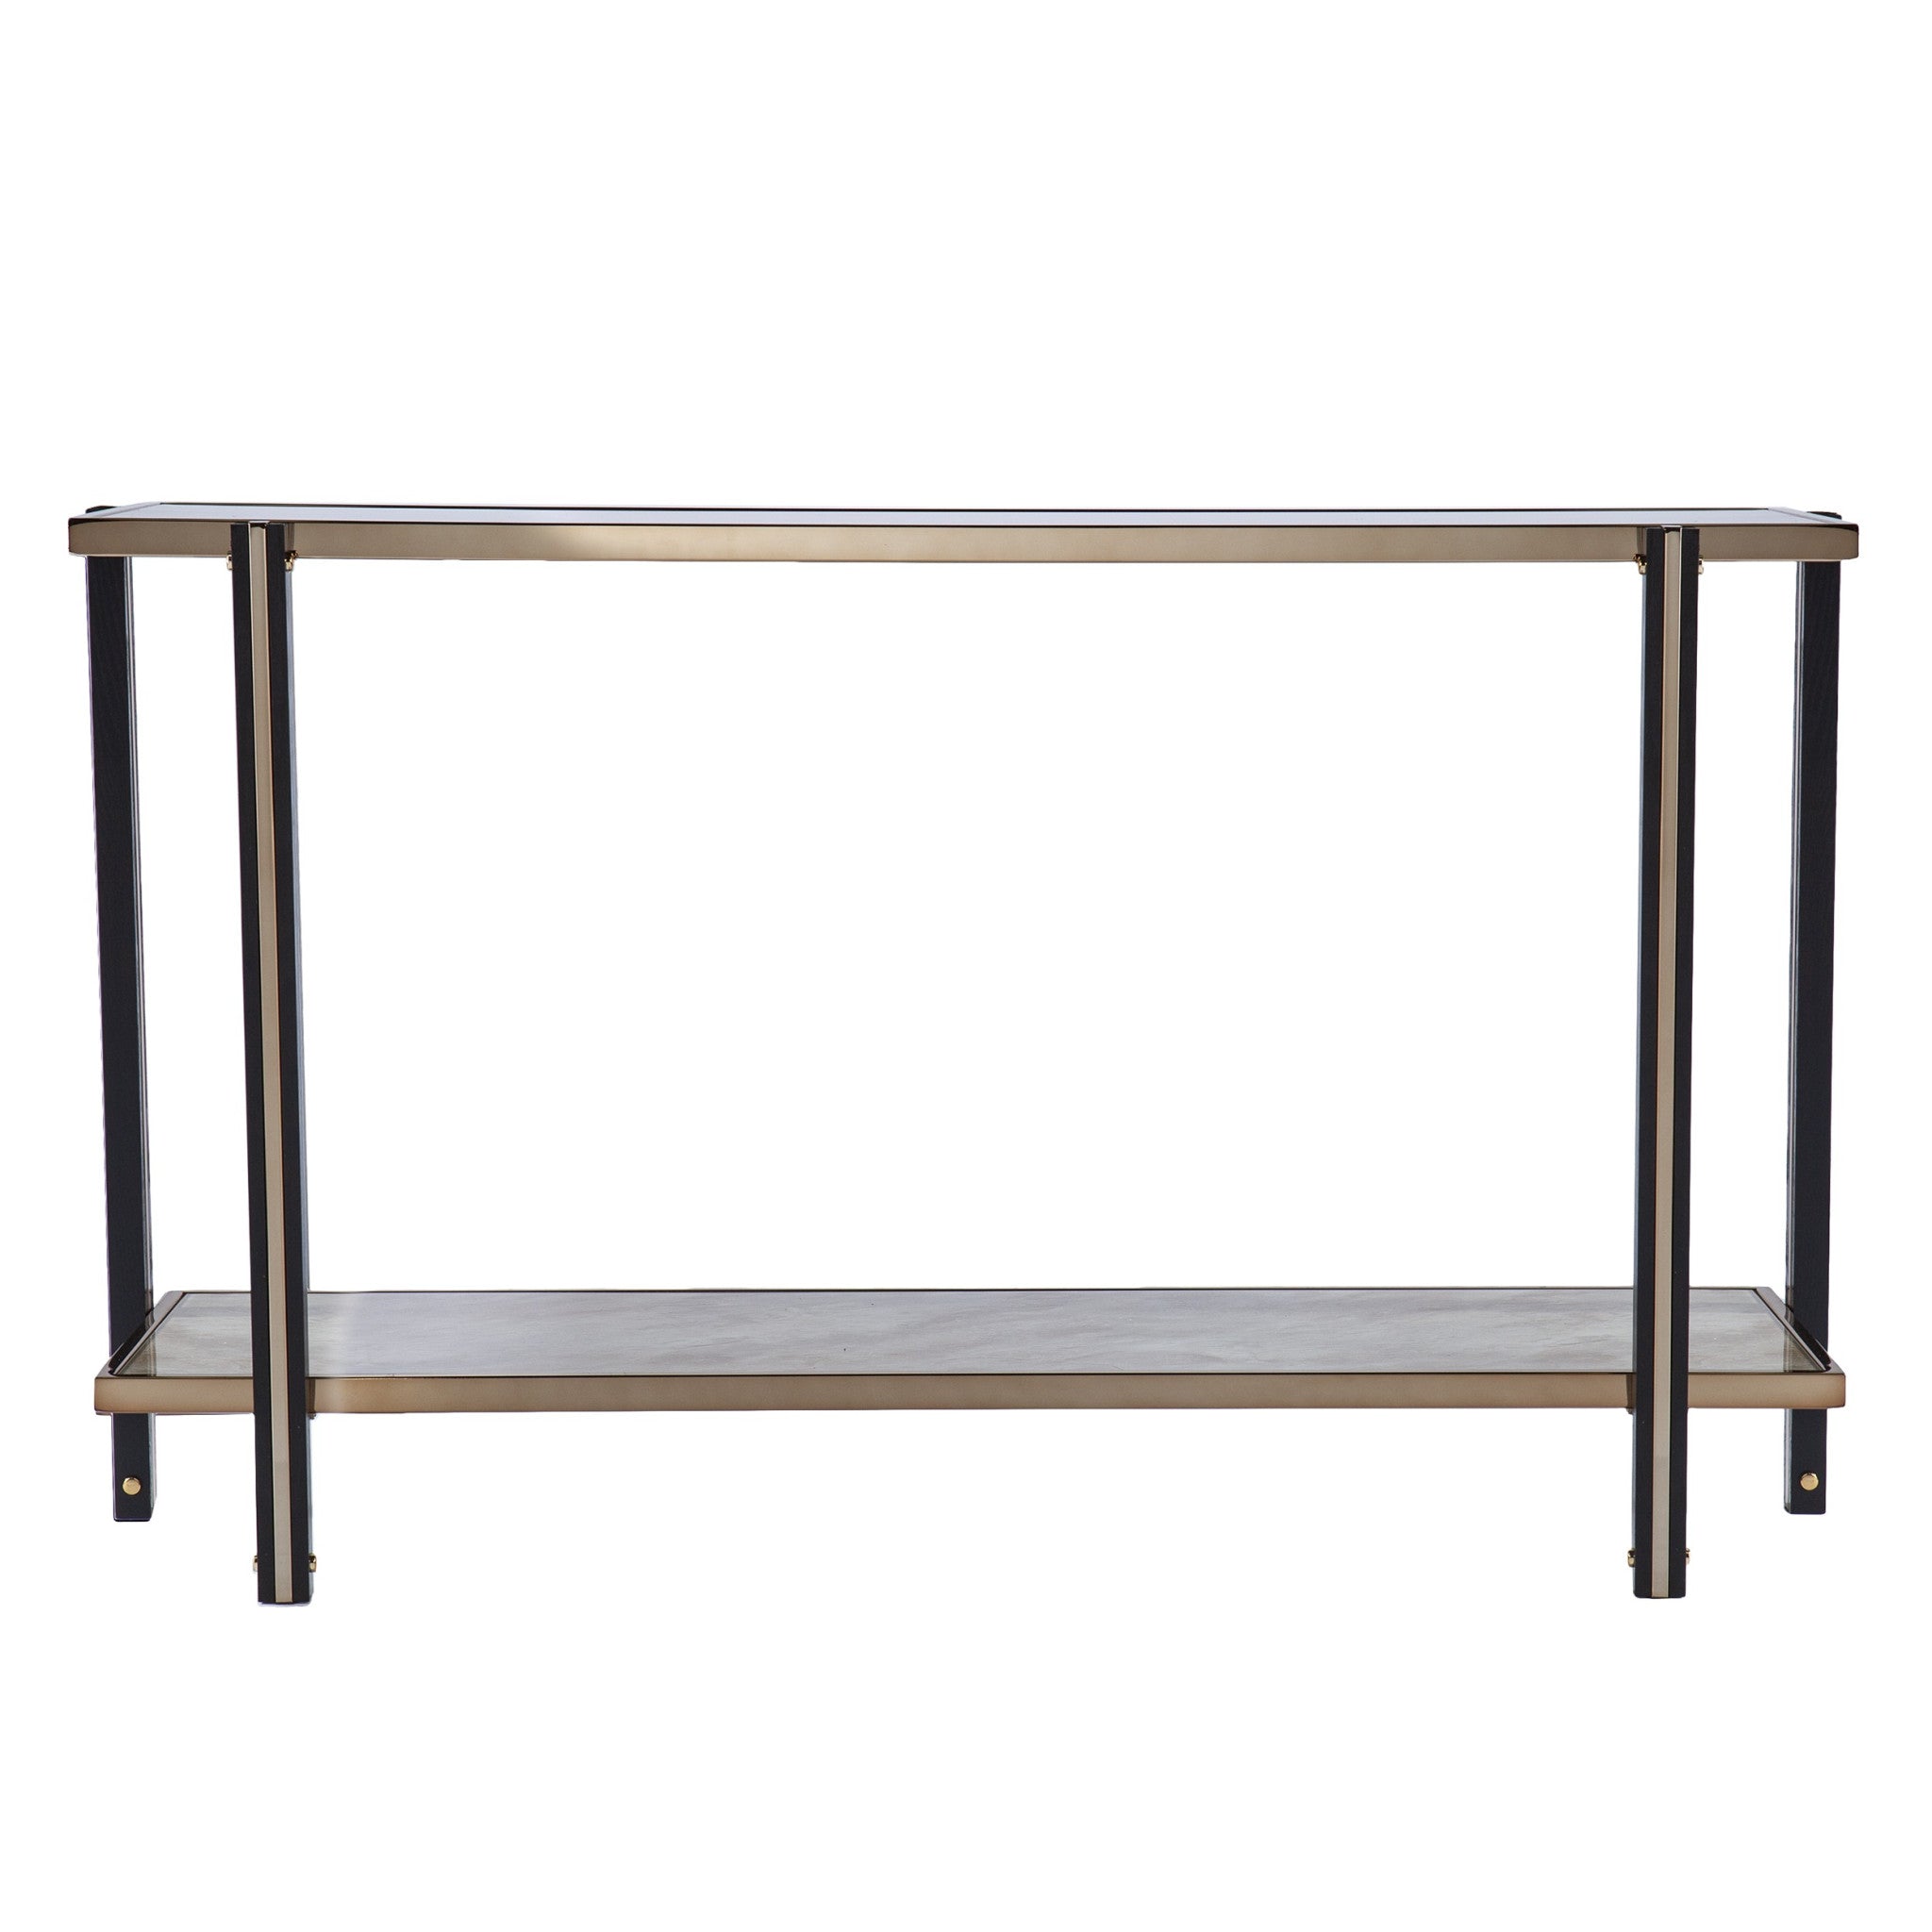 50" Smoky Black and Champagne Glass Mirrored Floor Shelf Console Table With Storage